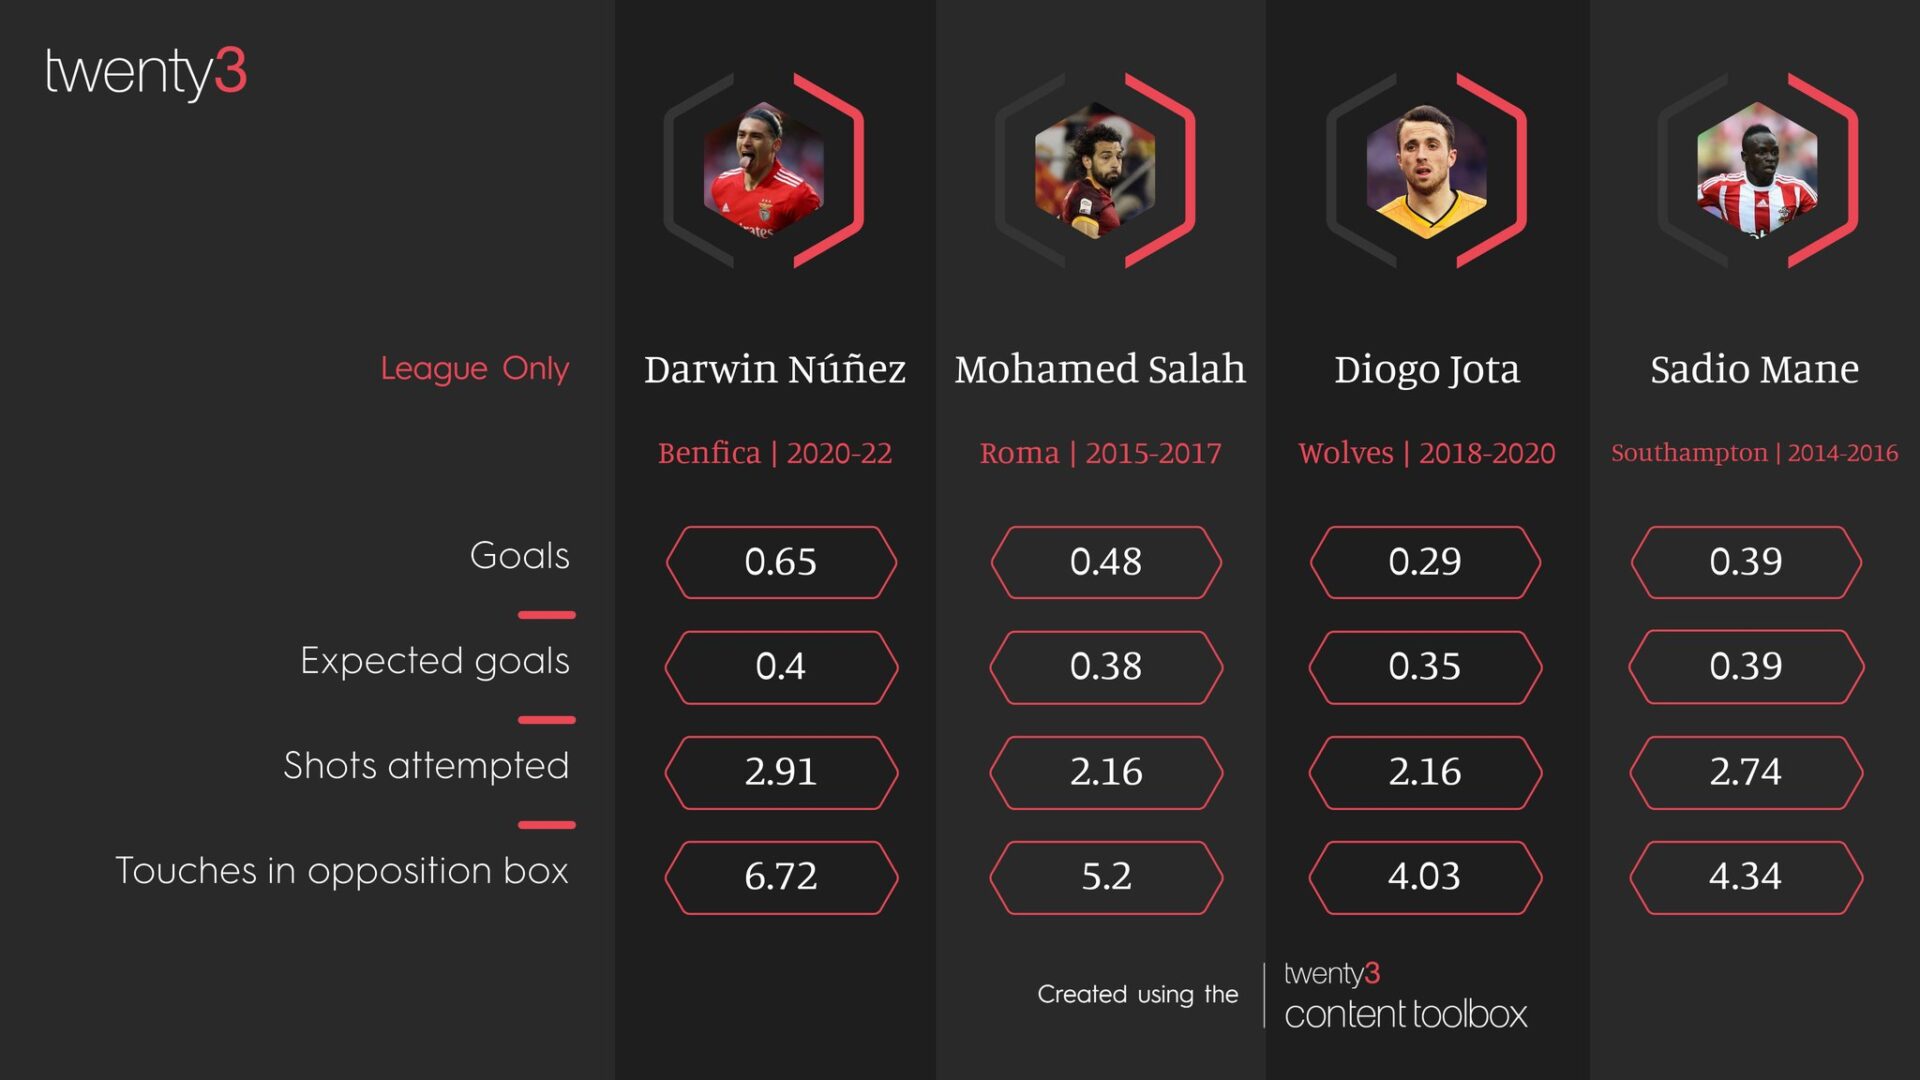 Liverpool target Darwin Nunez's underlying numbers compared to Salah, Jota and Mané (credit to Twenty3Sport, permission from @SamMcGuire90)